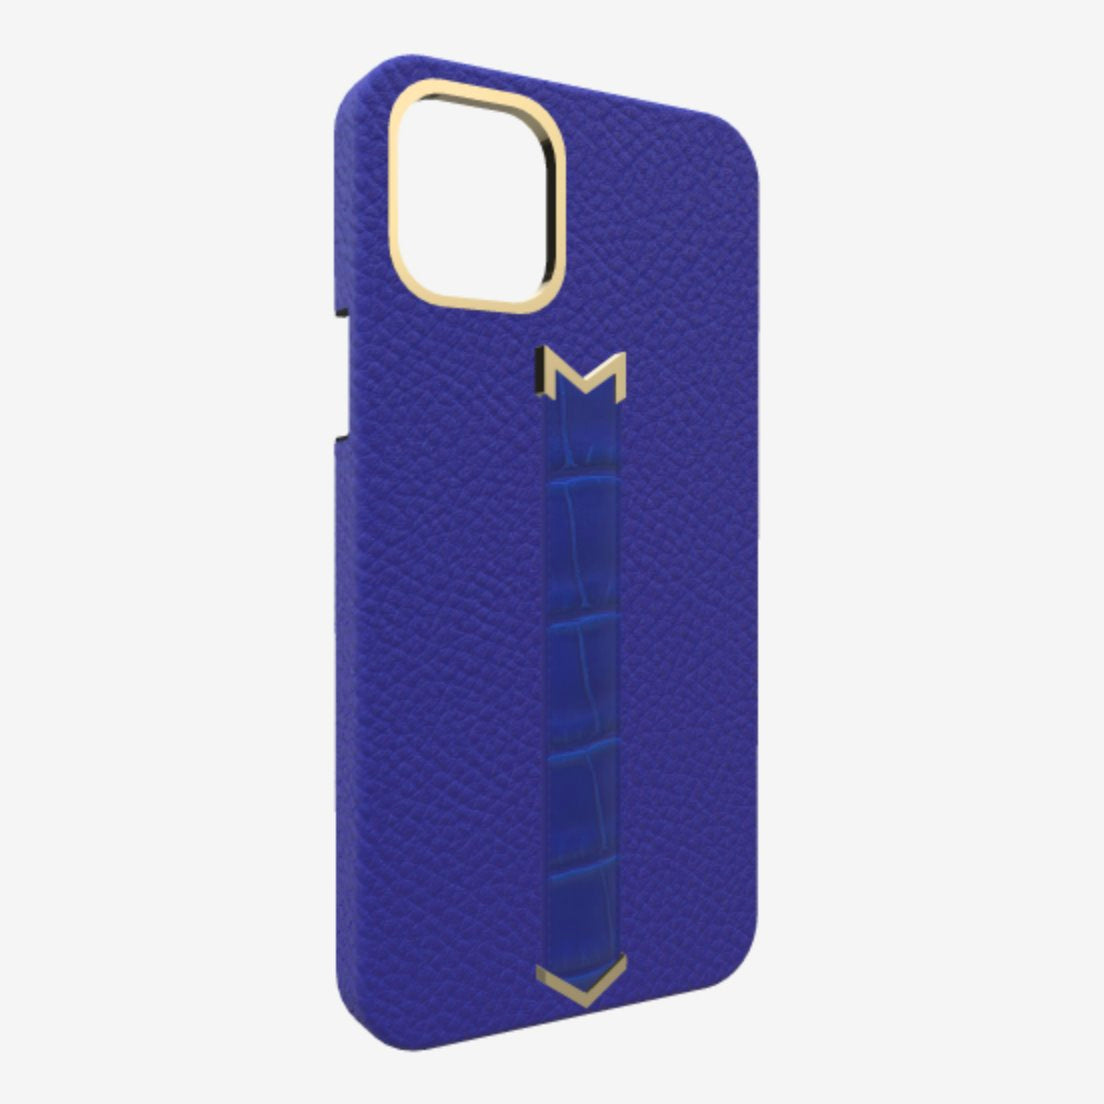 Gold Finger Strap Case for iPhone 13 in Genuine Calfskin and Alligator Electric Blue Electric Blue 